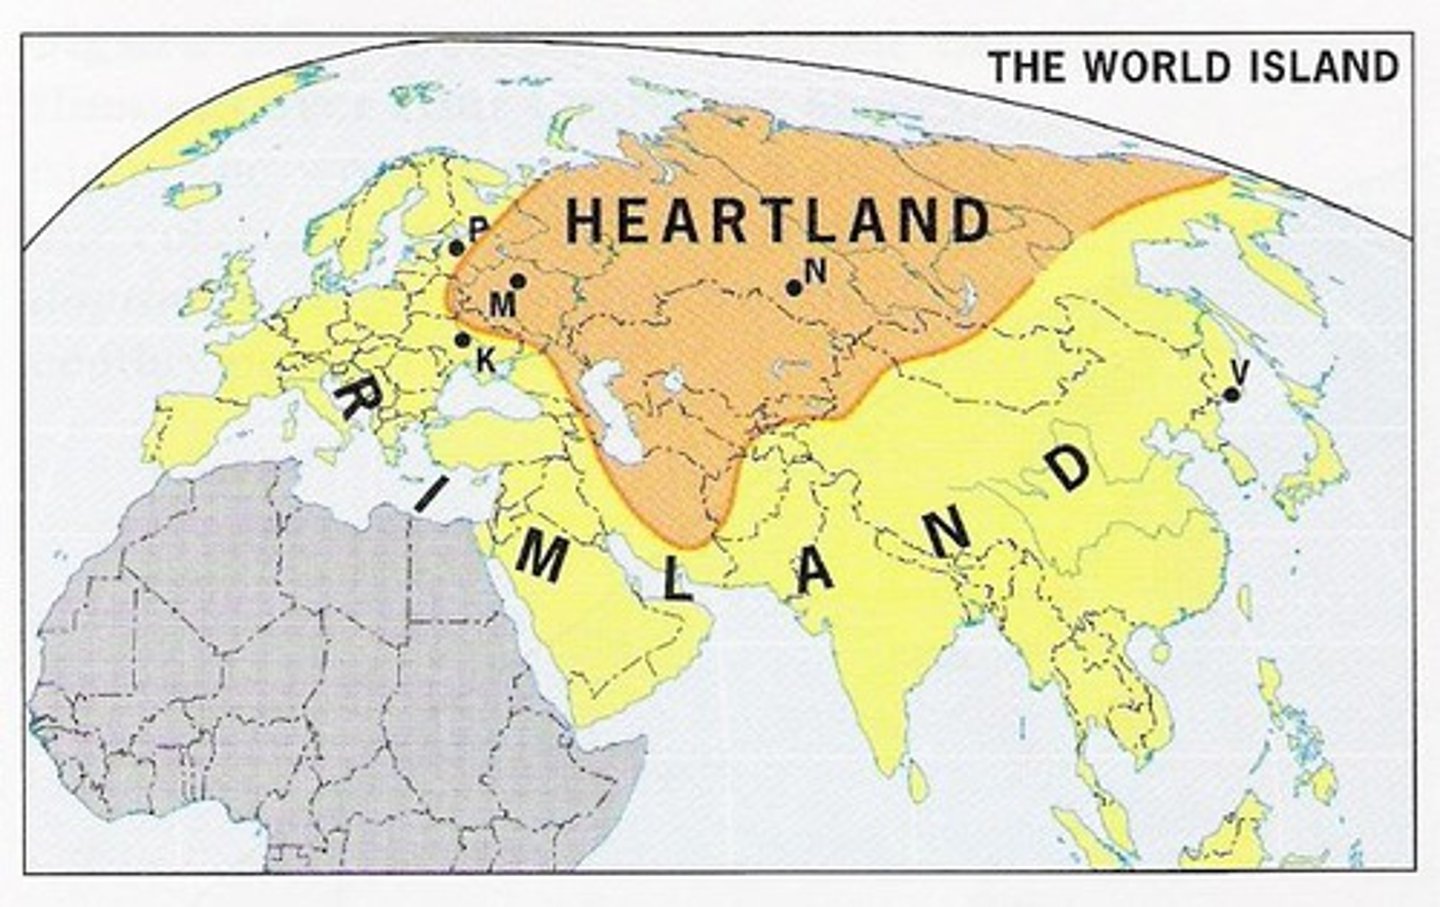 <p>Nicholas Spykman developed this theory arguing that the rimland area surrounding the heartland (including the world's oceans) was the key to world political power.</p>